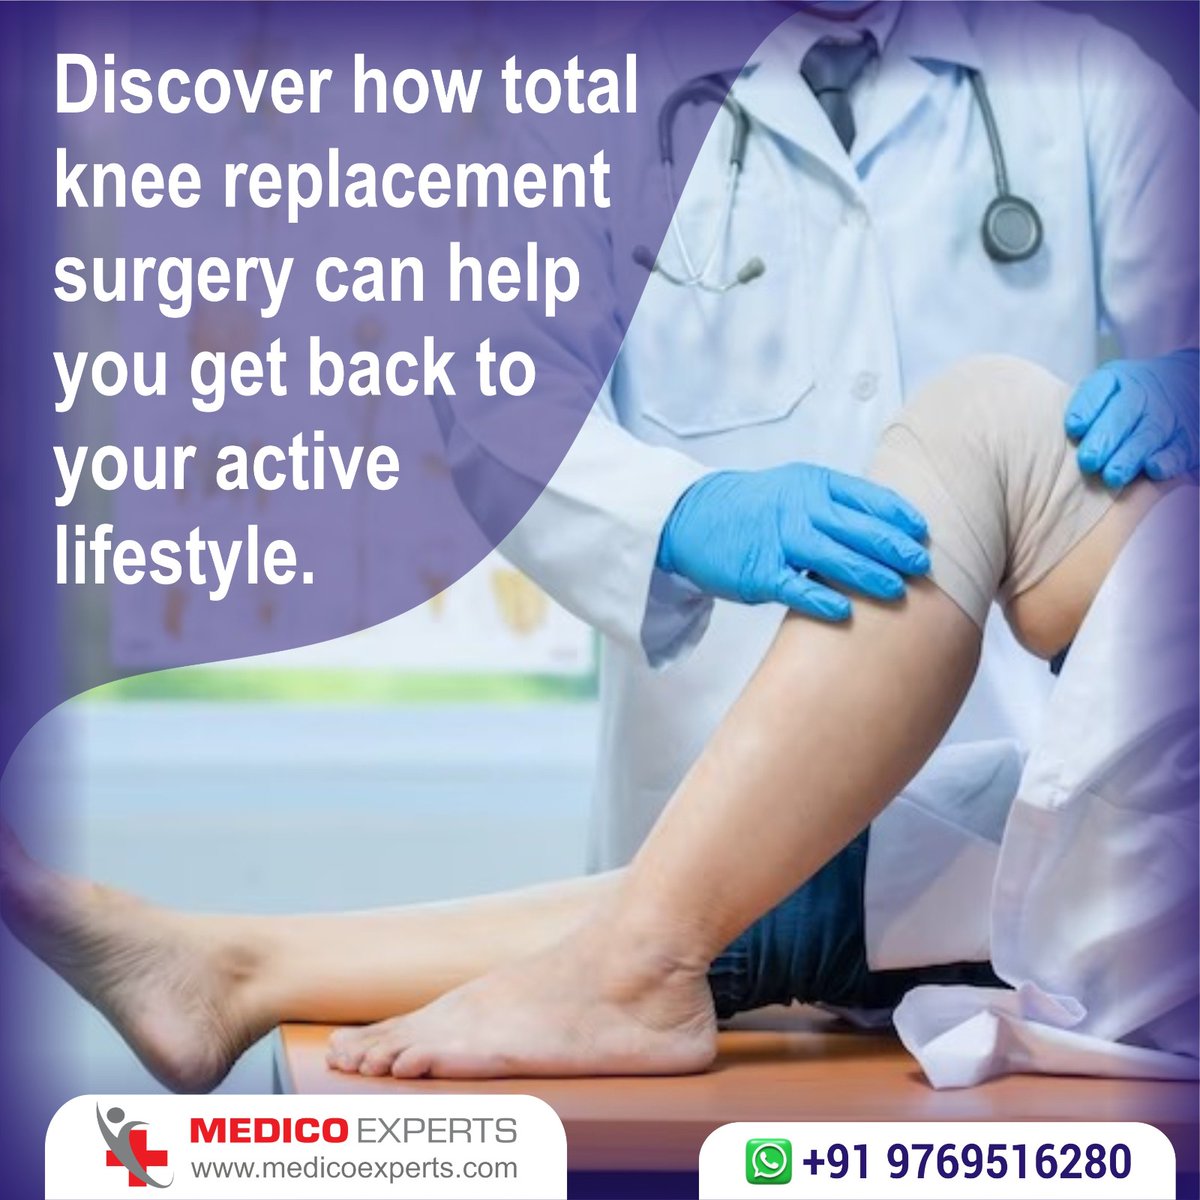 Get Pain free life with advanced knee replacement surgery in India 
Know More : medicoexperts.com/total-knee-rep…
#KneePain #Ortho #BestTreatment #Oerhopaedics #MedicoExperts